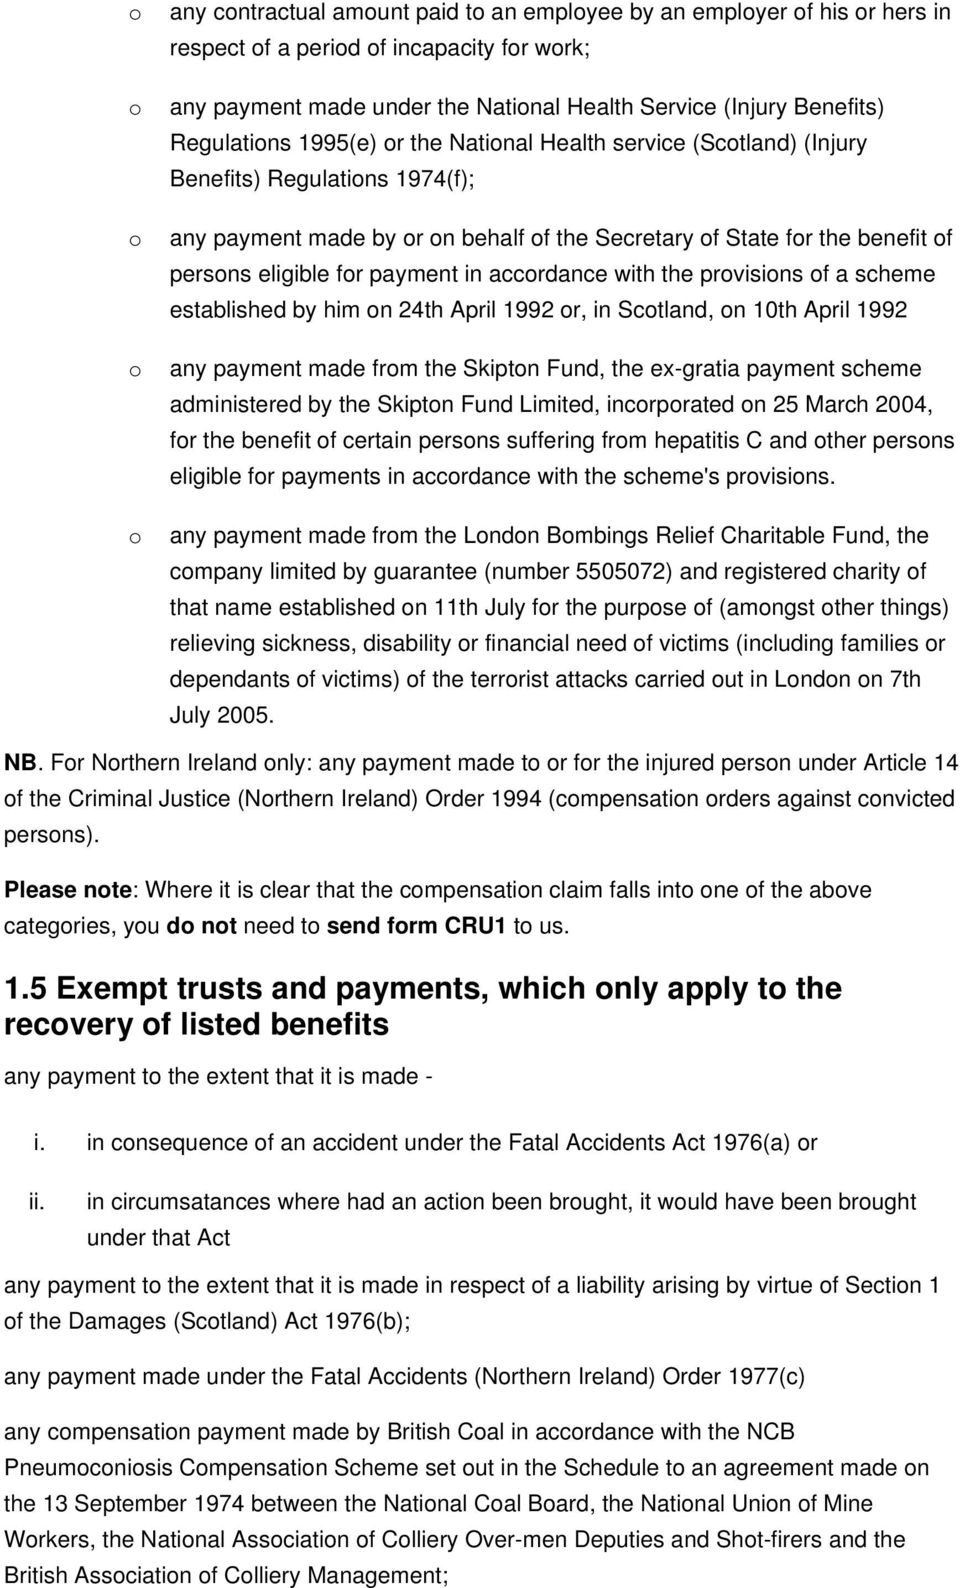 payment in accordance with the provisions of a scheme established by him on 24th April 1992 or, in Scotland, on 10th April 1992 any payment made from the Skipton Fund, the ex-gratia payment scheme